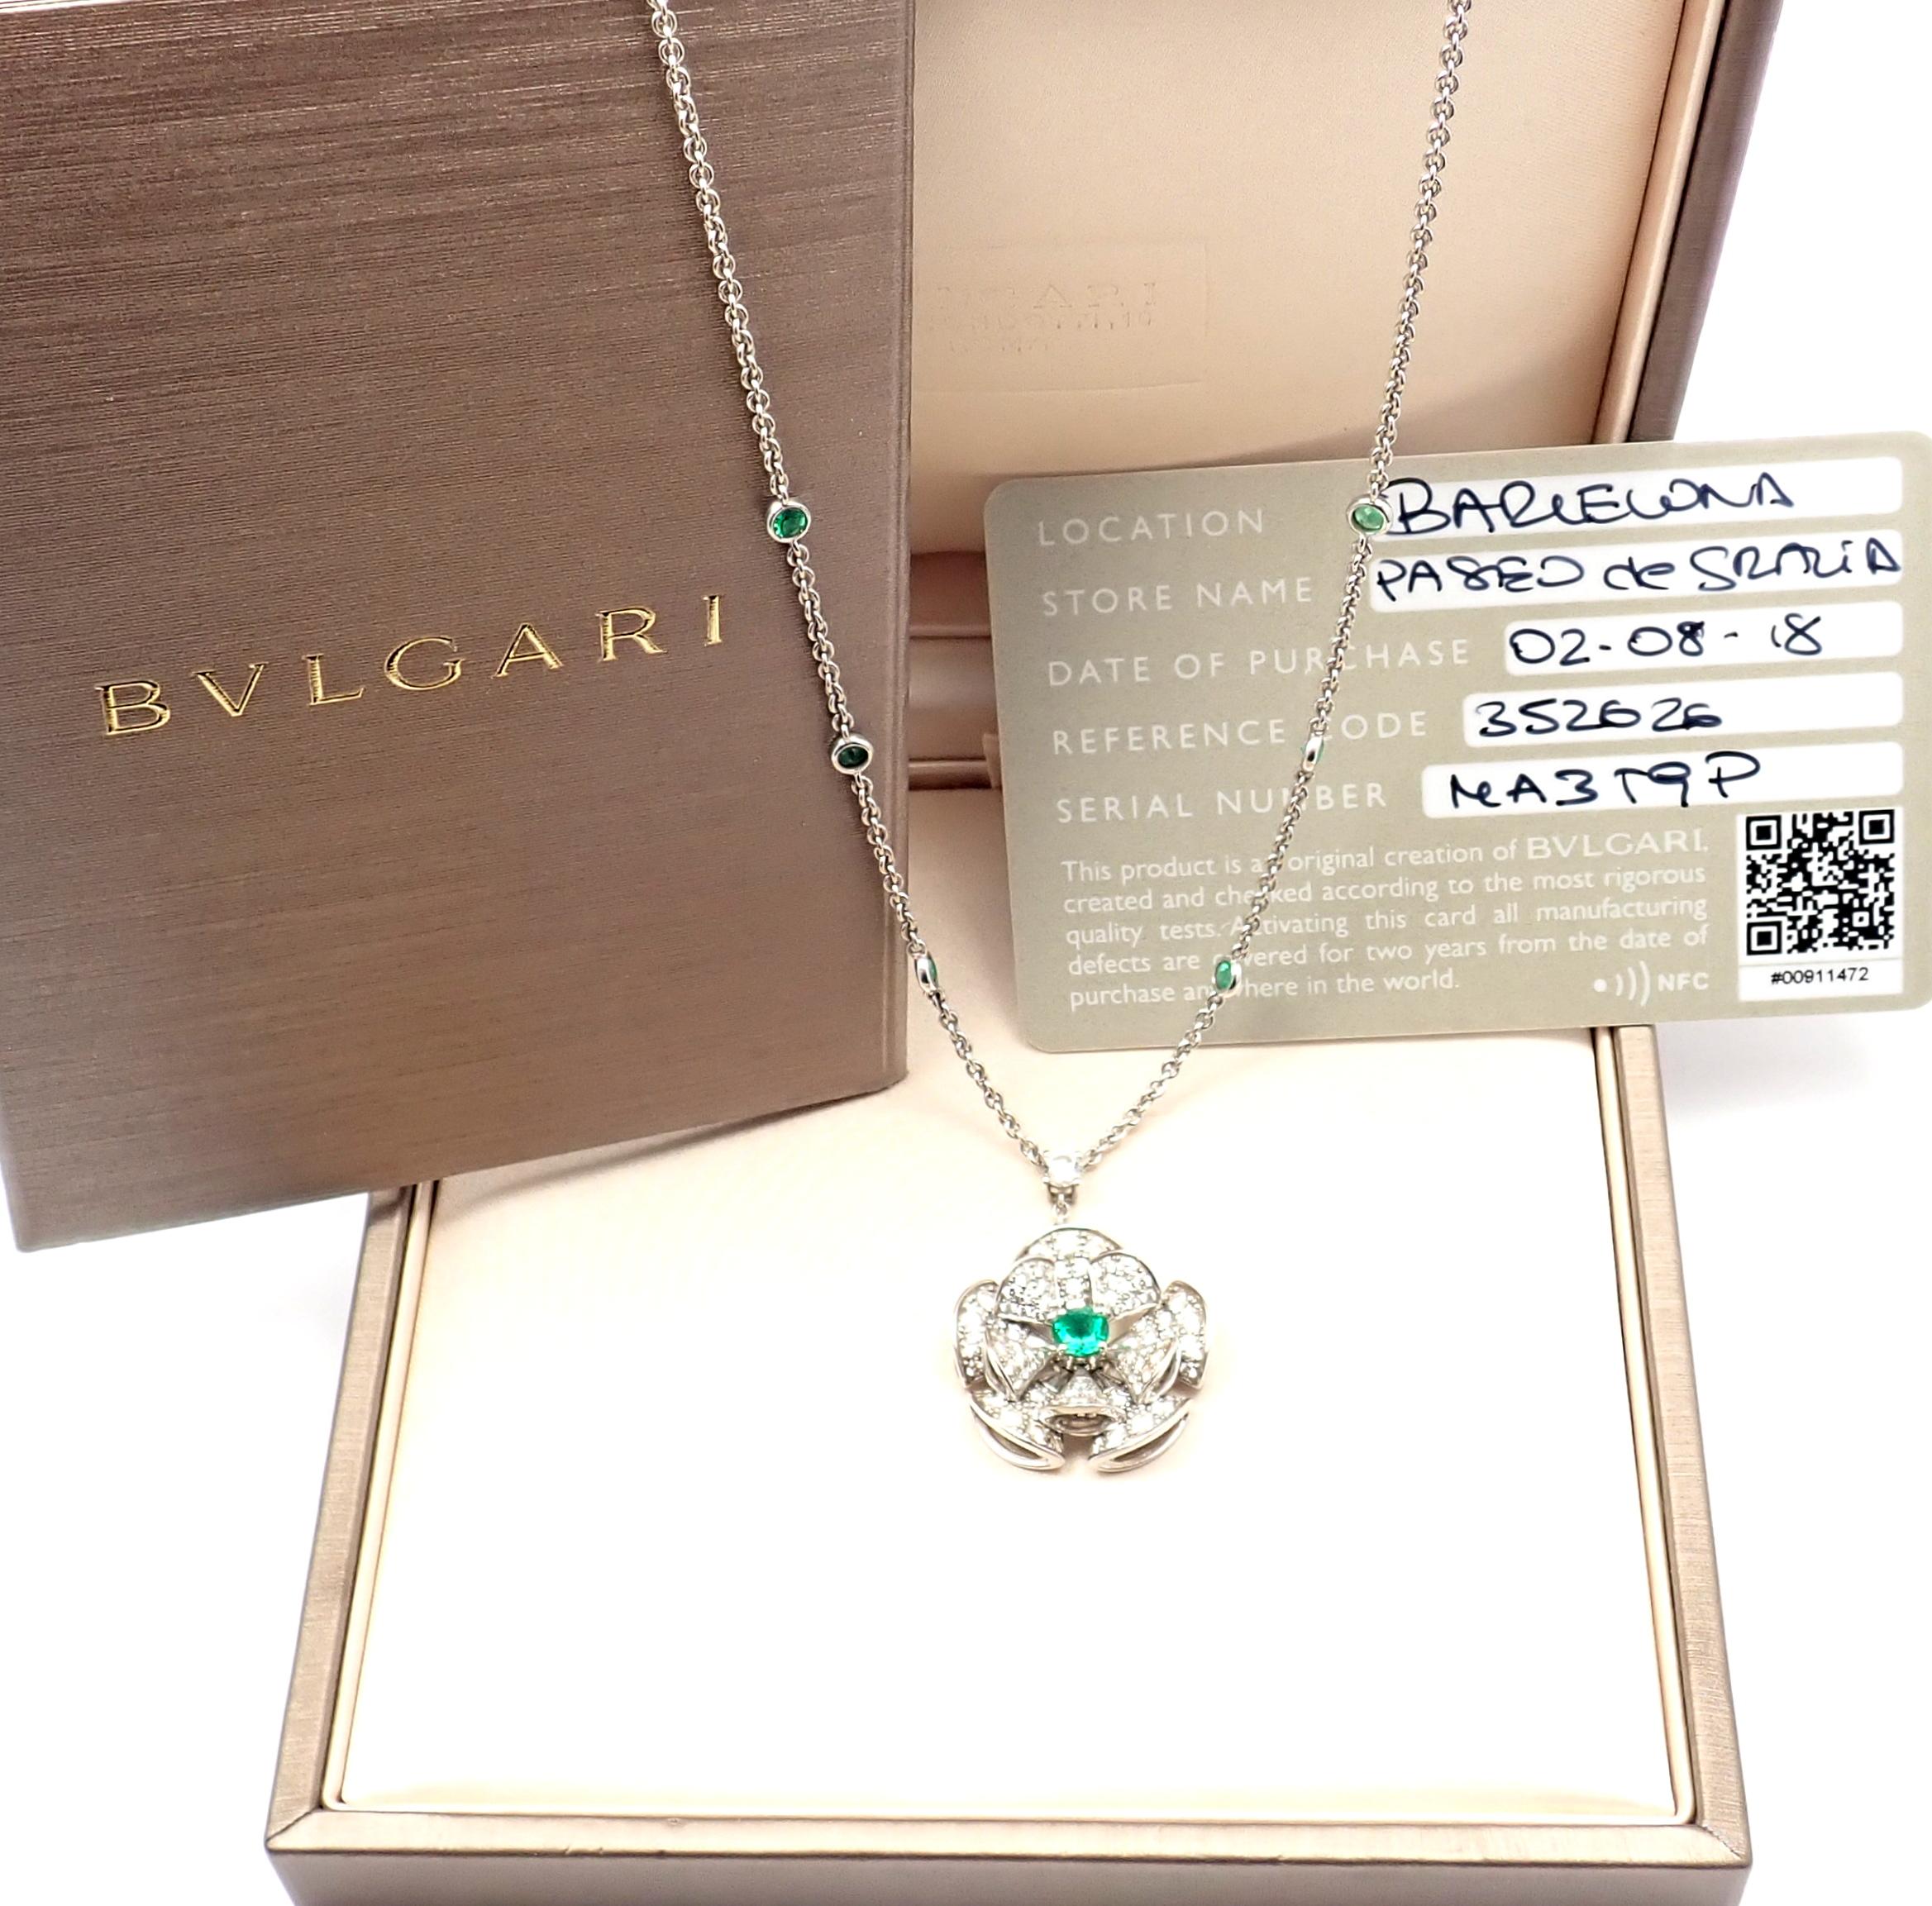 18k White Gold Divas' Dream Diamond Emerald Drop Necklace by Bulgari. 
With Round brilliant cut diamonds VVS1 clarity E color 
Round emeralds.
This necklace comes with Bulgari box and certificate.
Retail Price: $28,700 plus tax.
Details: 
Length: